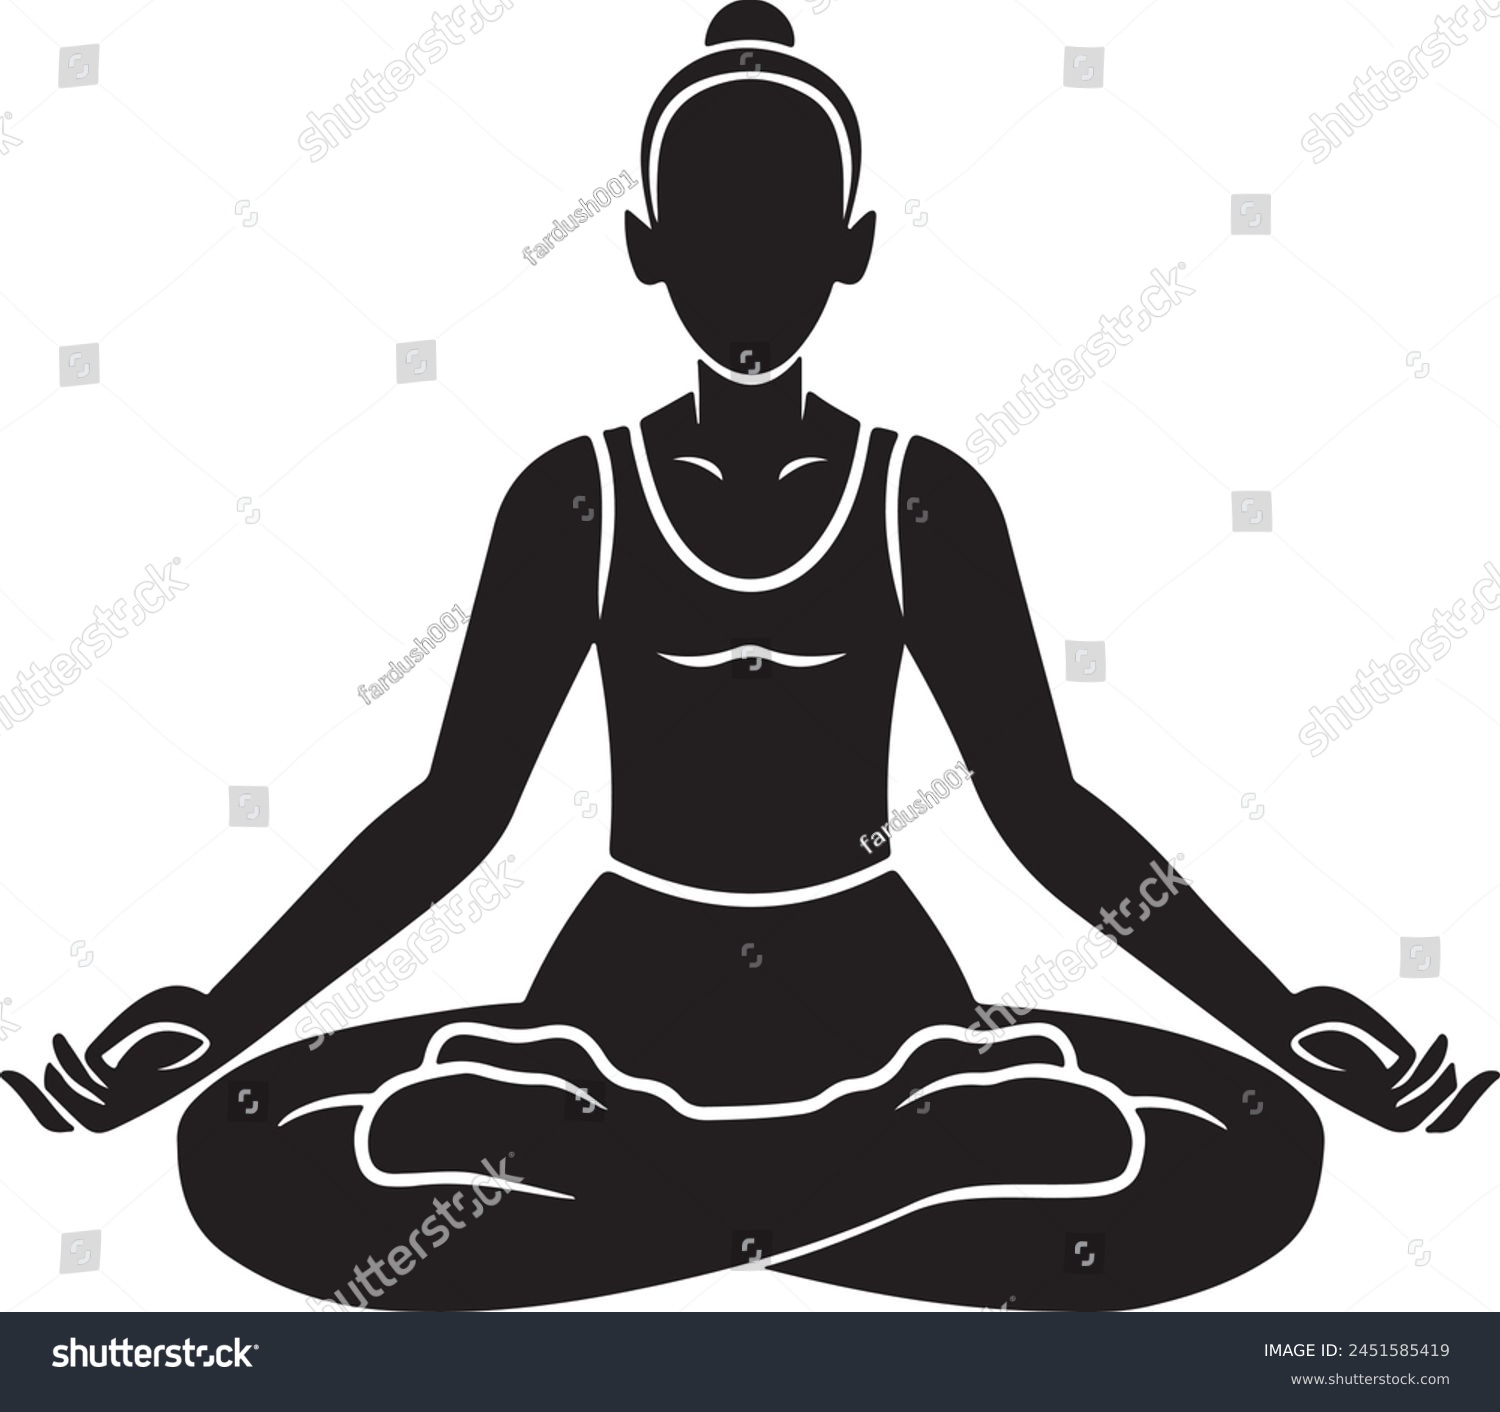 SVG of a black silhouette of a woman doing yoga svg